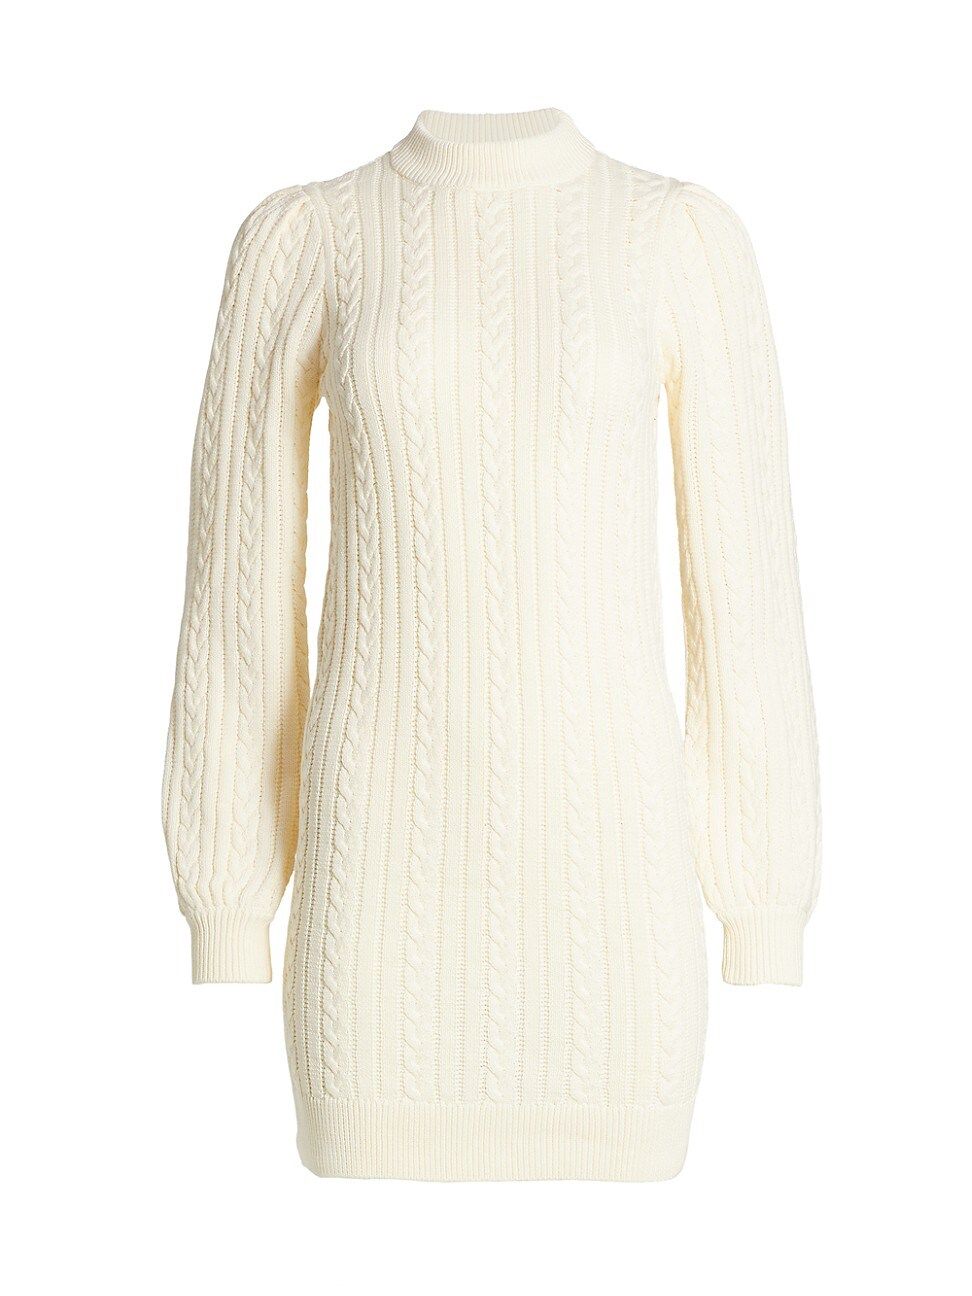 Julie Cabled Sweater Dress | Saks Fifth Avenue